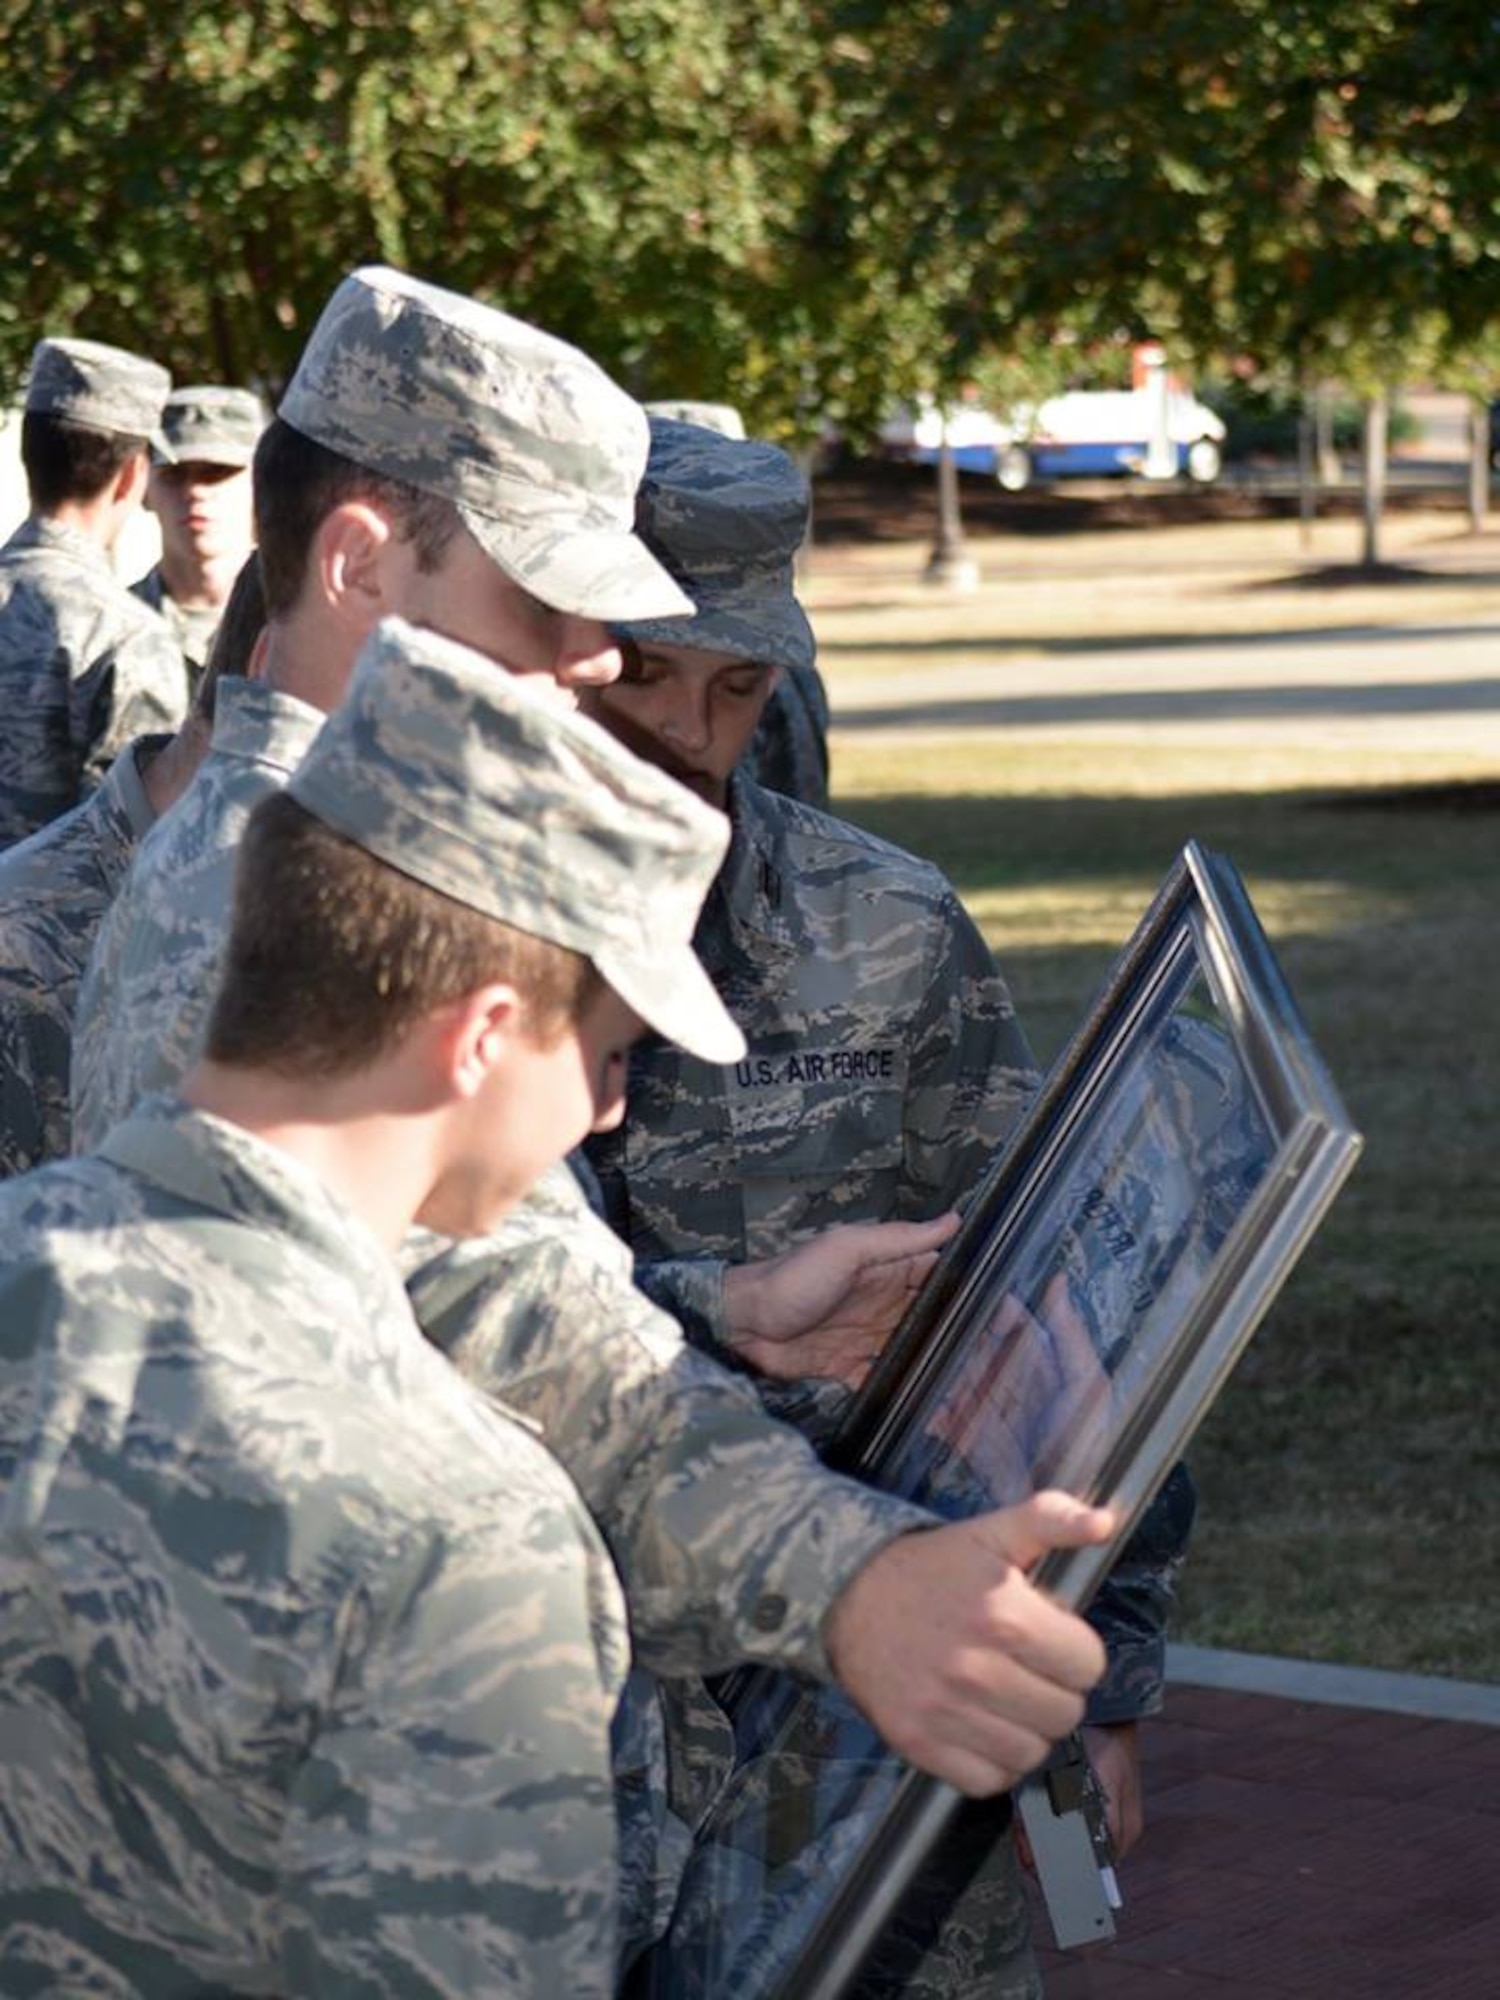 Three Air Force ROTC cadets from Auburn University’s Detachment 005 look at artwork following a career day Oct. 13th at Auburn University. The Gathering of Eagles Foundation presented the ROTC detachment with the framed lithograph, featuring men and women who made lasting contributions to air power, to inspire the cadets as they prepare for a career in the Air Force.  (US Air Force photo by Maj. Will Powell)